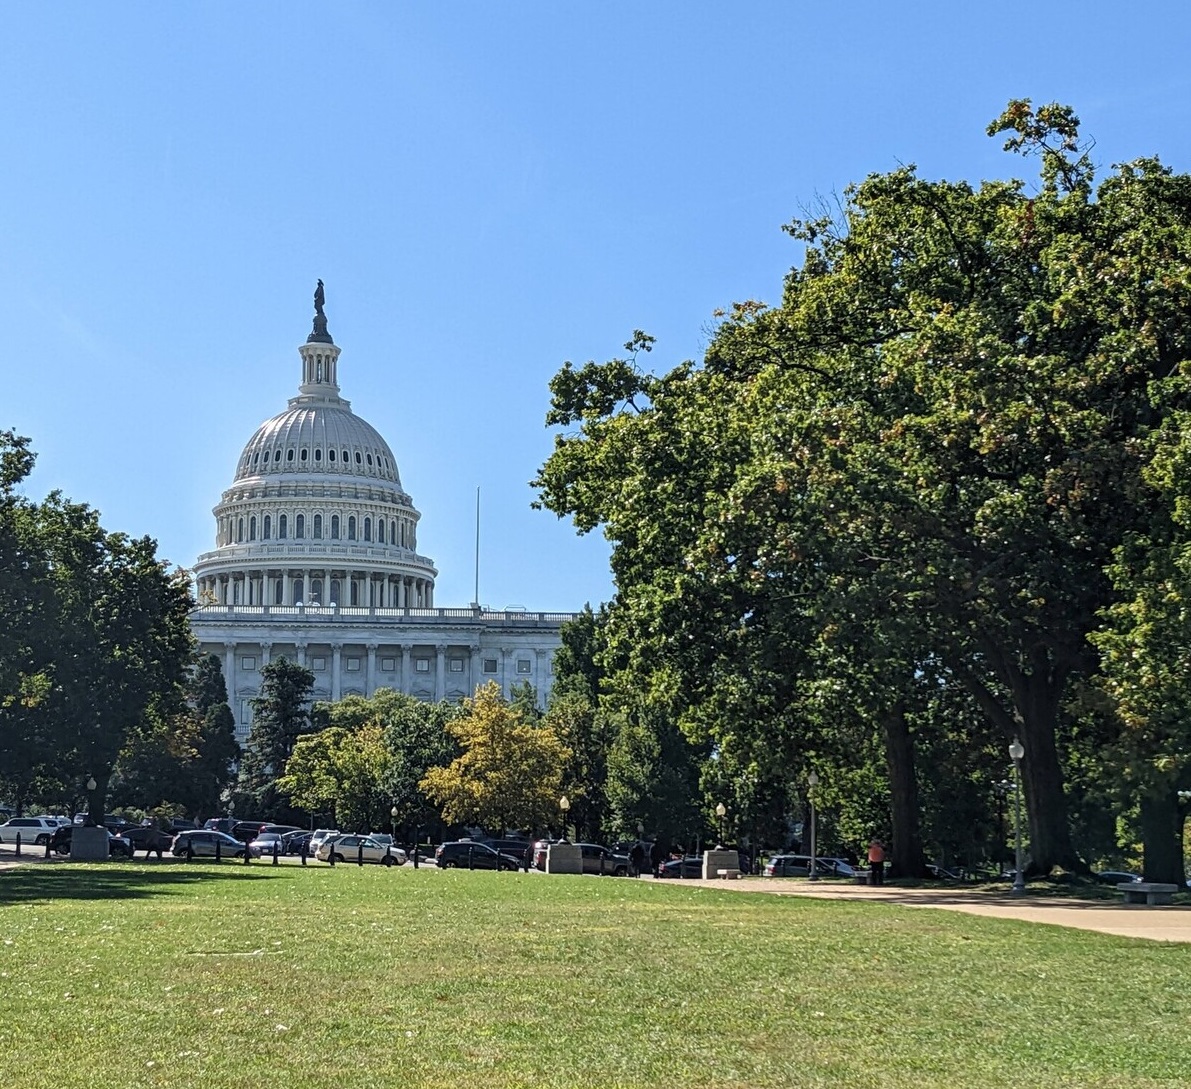 Image of the capitol building in Washington, DC